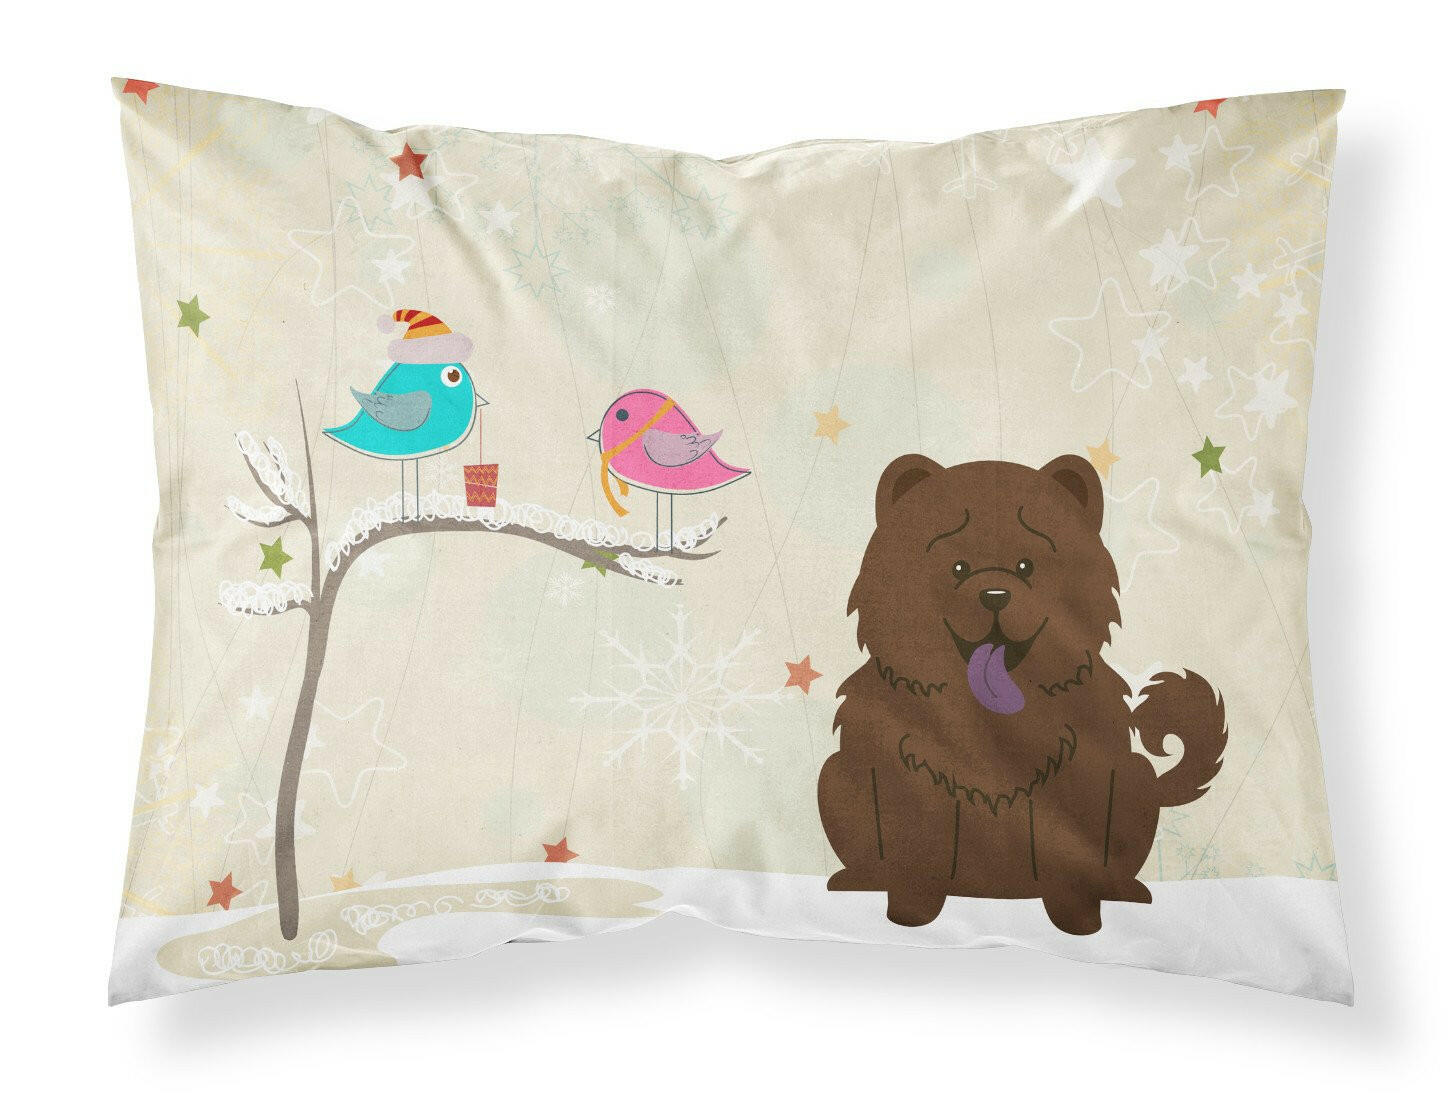 Christmas Presents between Friends Chow Chow Chocolate Fabric Standard Pillowcase BB2613PILLOWCASE by Caroline's Treasures